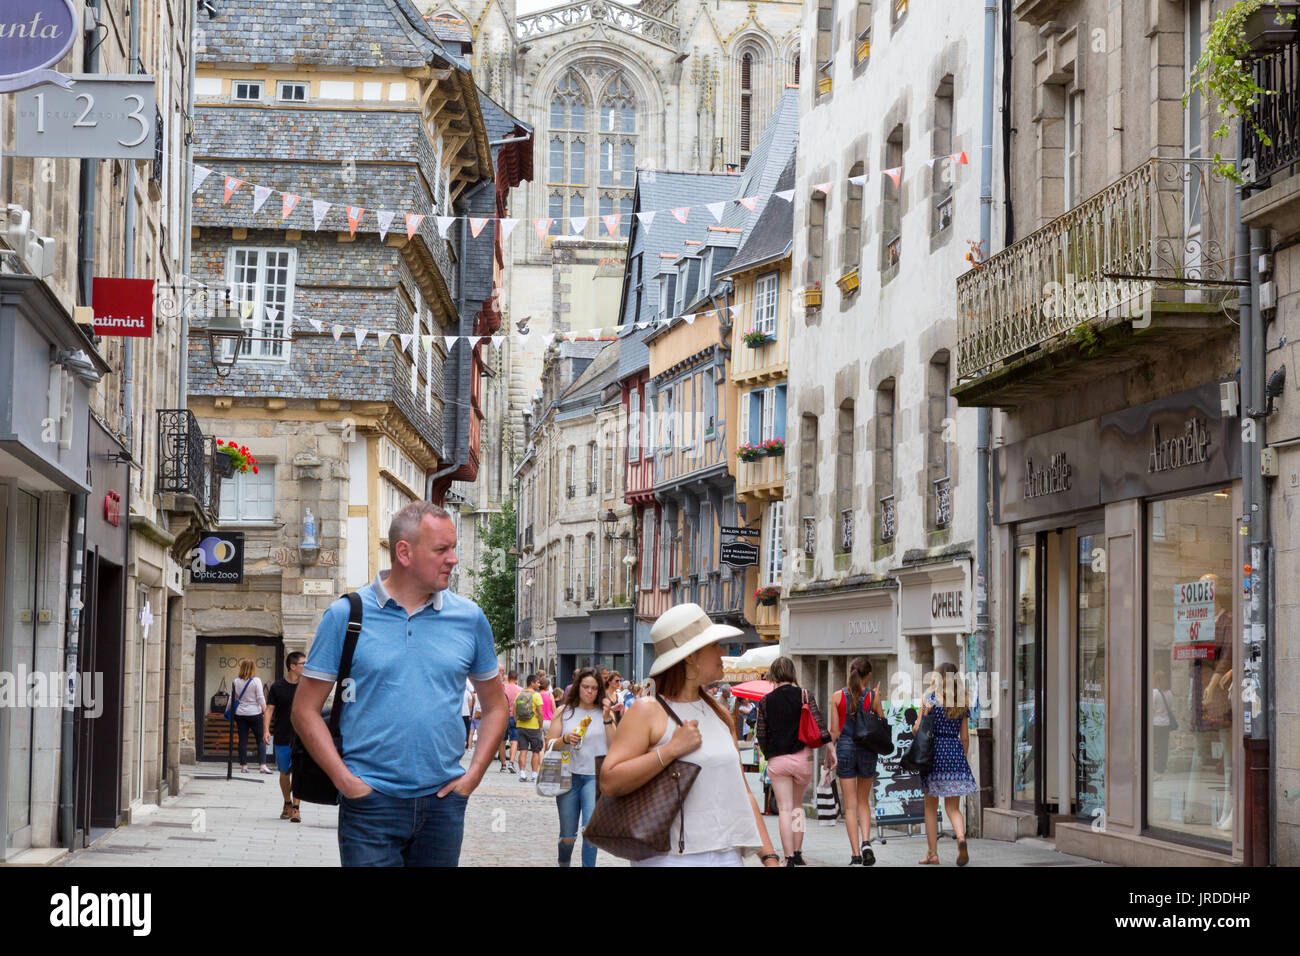 Quimper Brittany France - street scene, near the cathedral, Quimper, Cornouaille, Finistere Brittany France Stock Photo